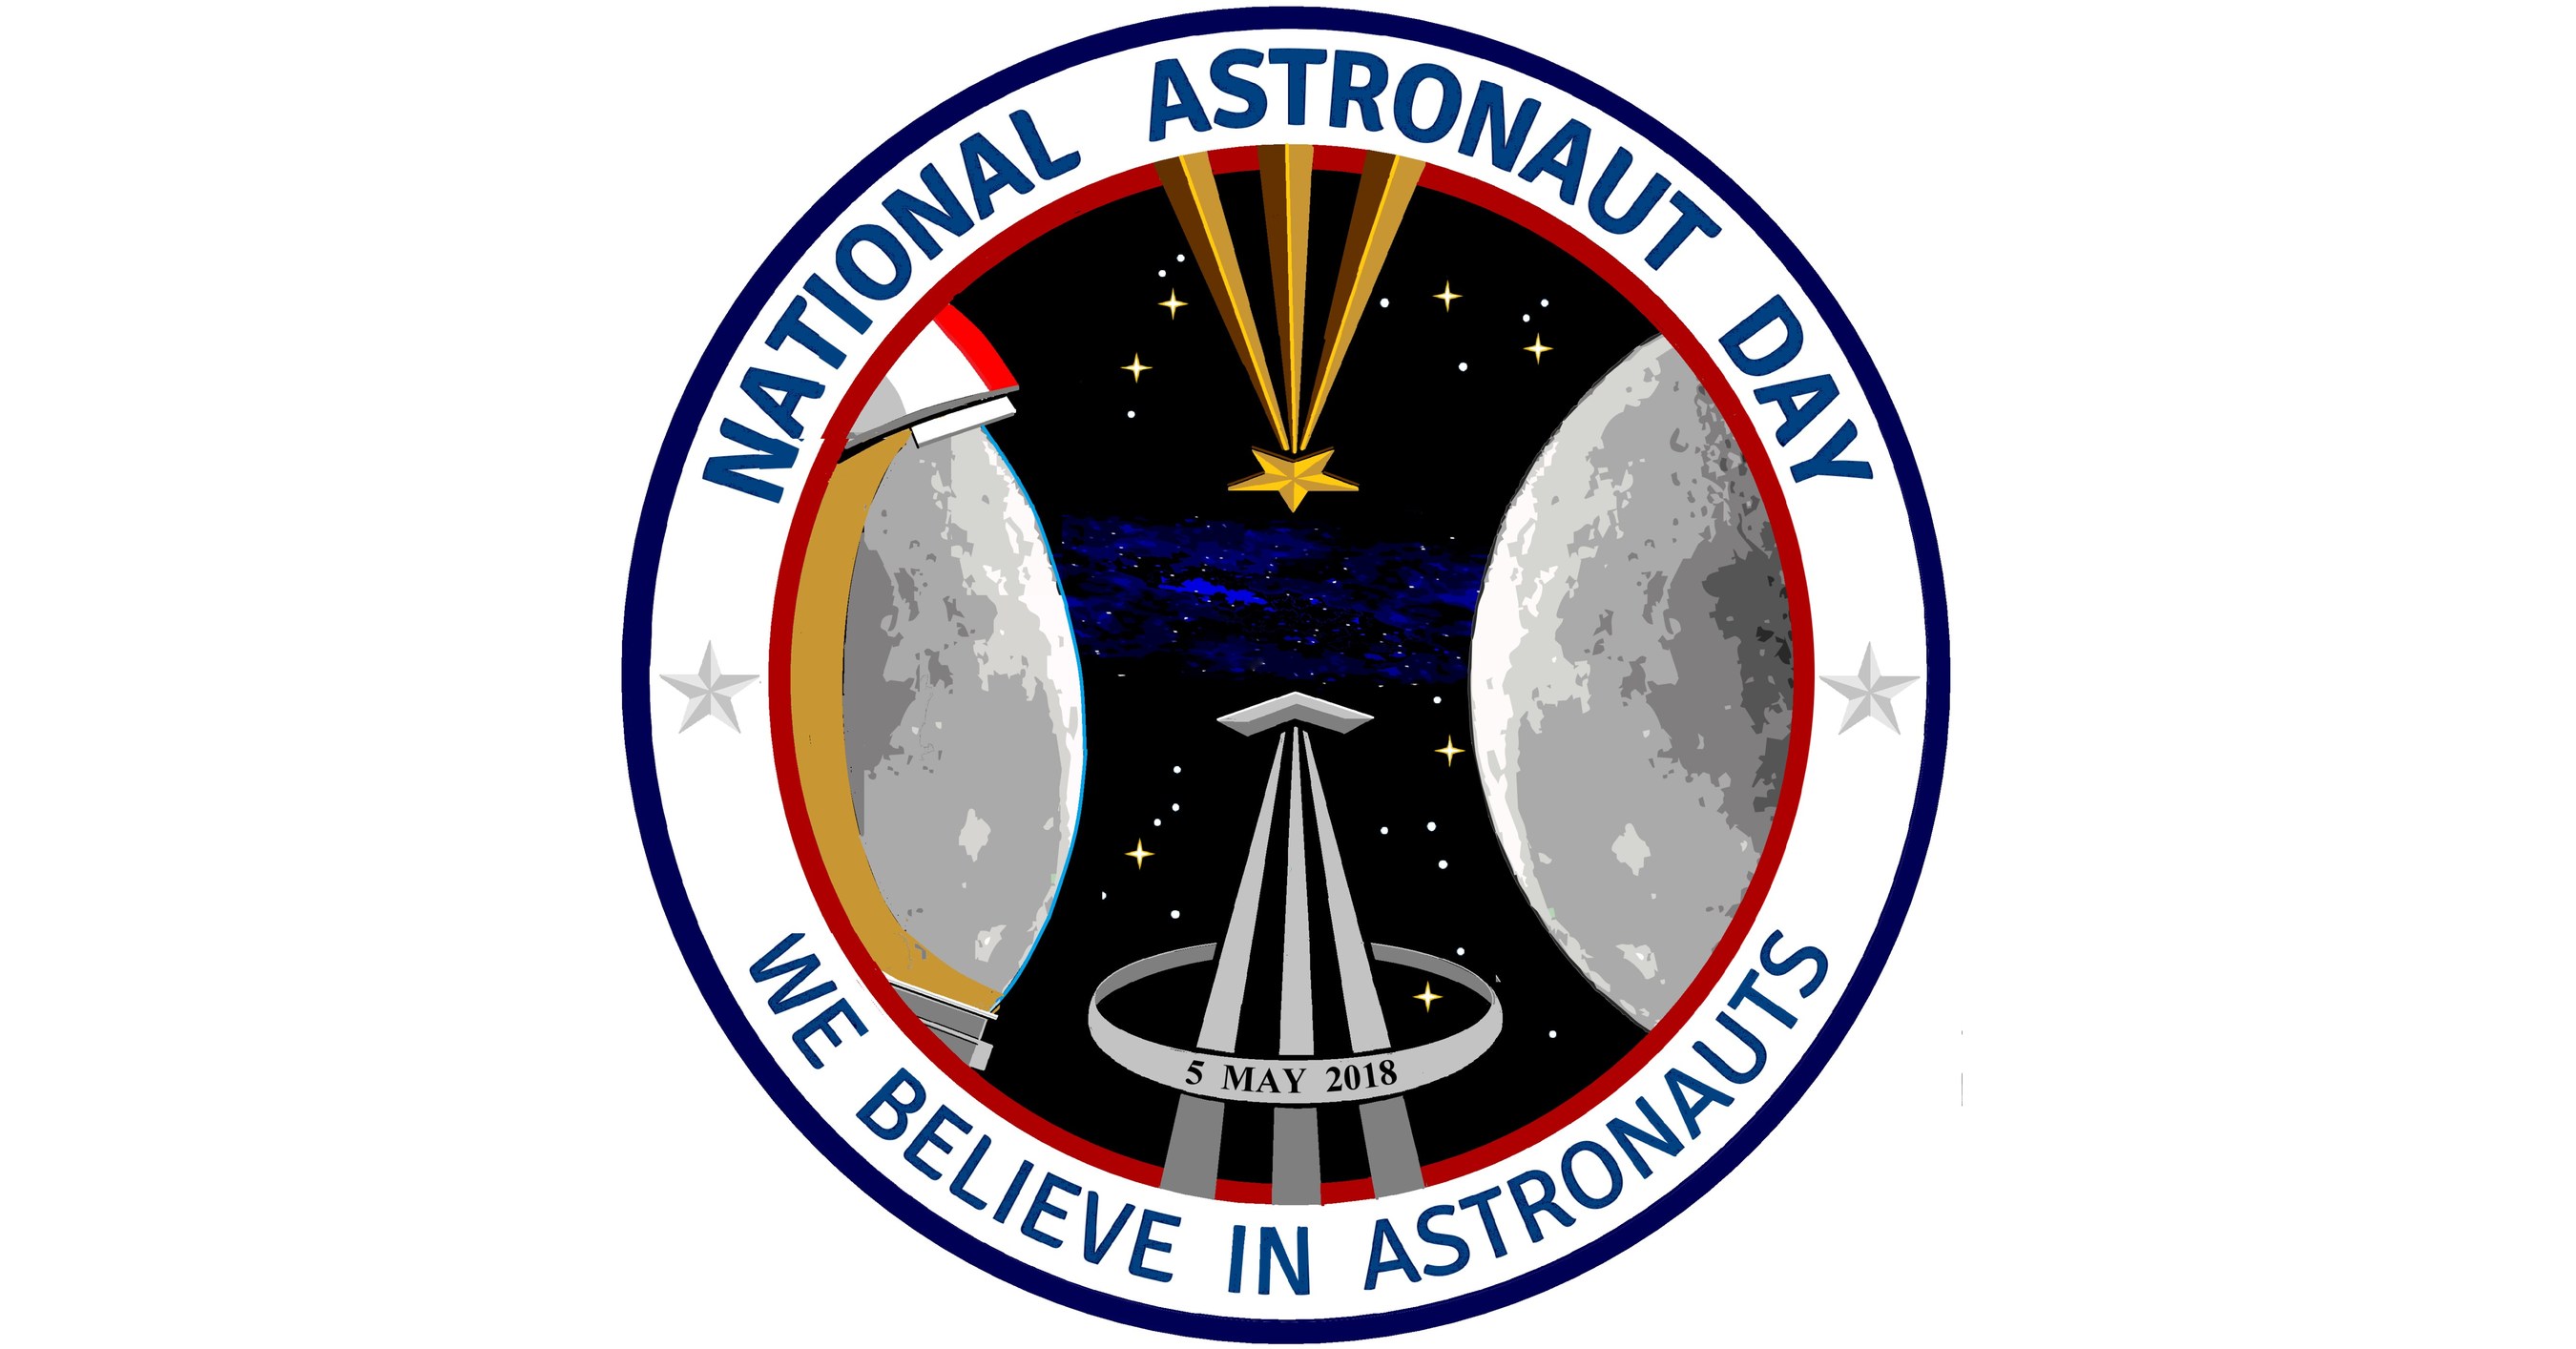 uniphi space agency Is Proud to Announce the ThirdAnnual National